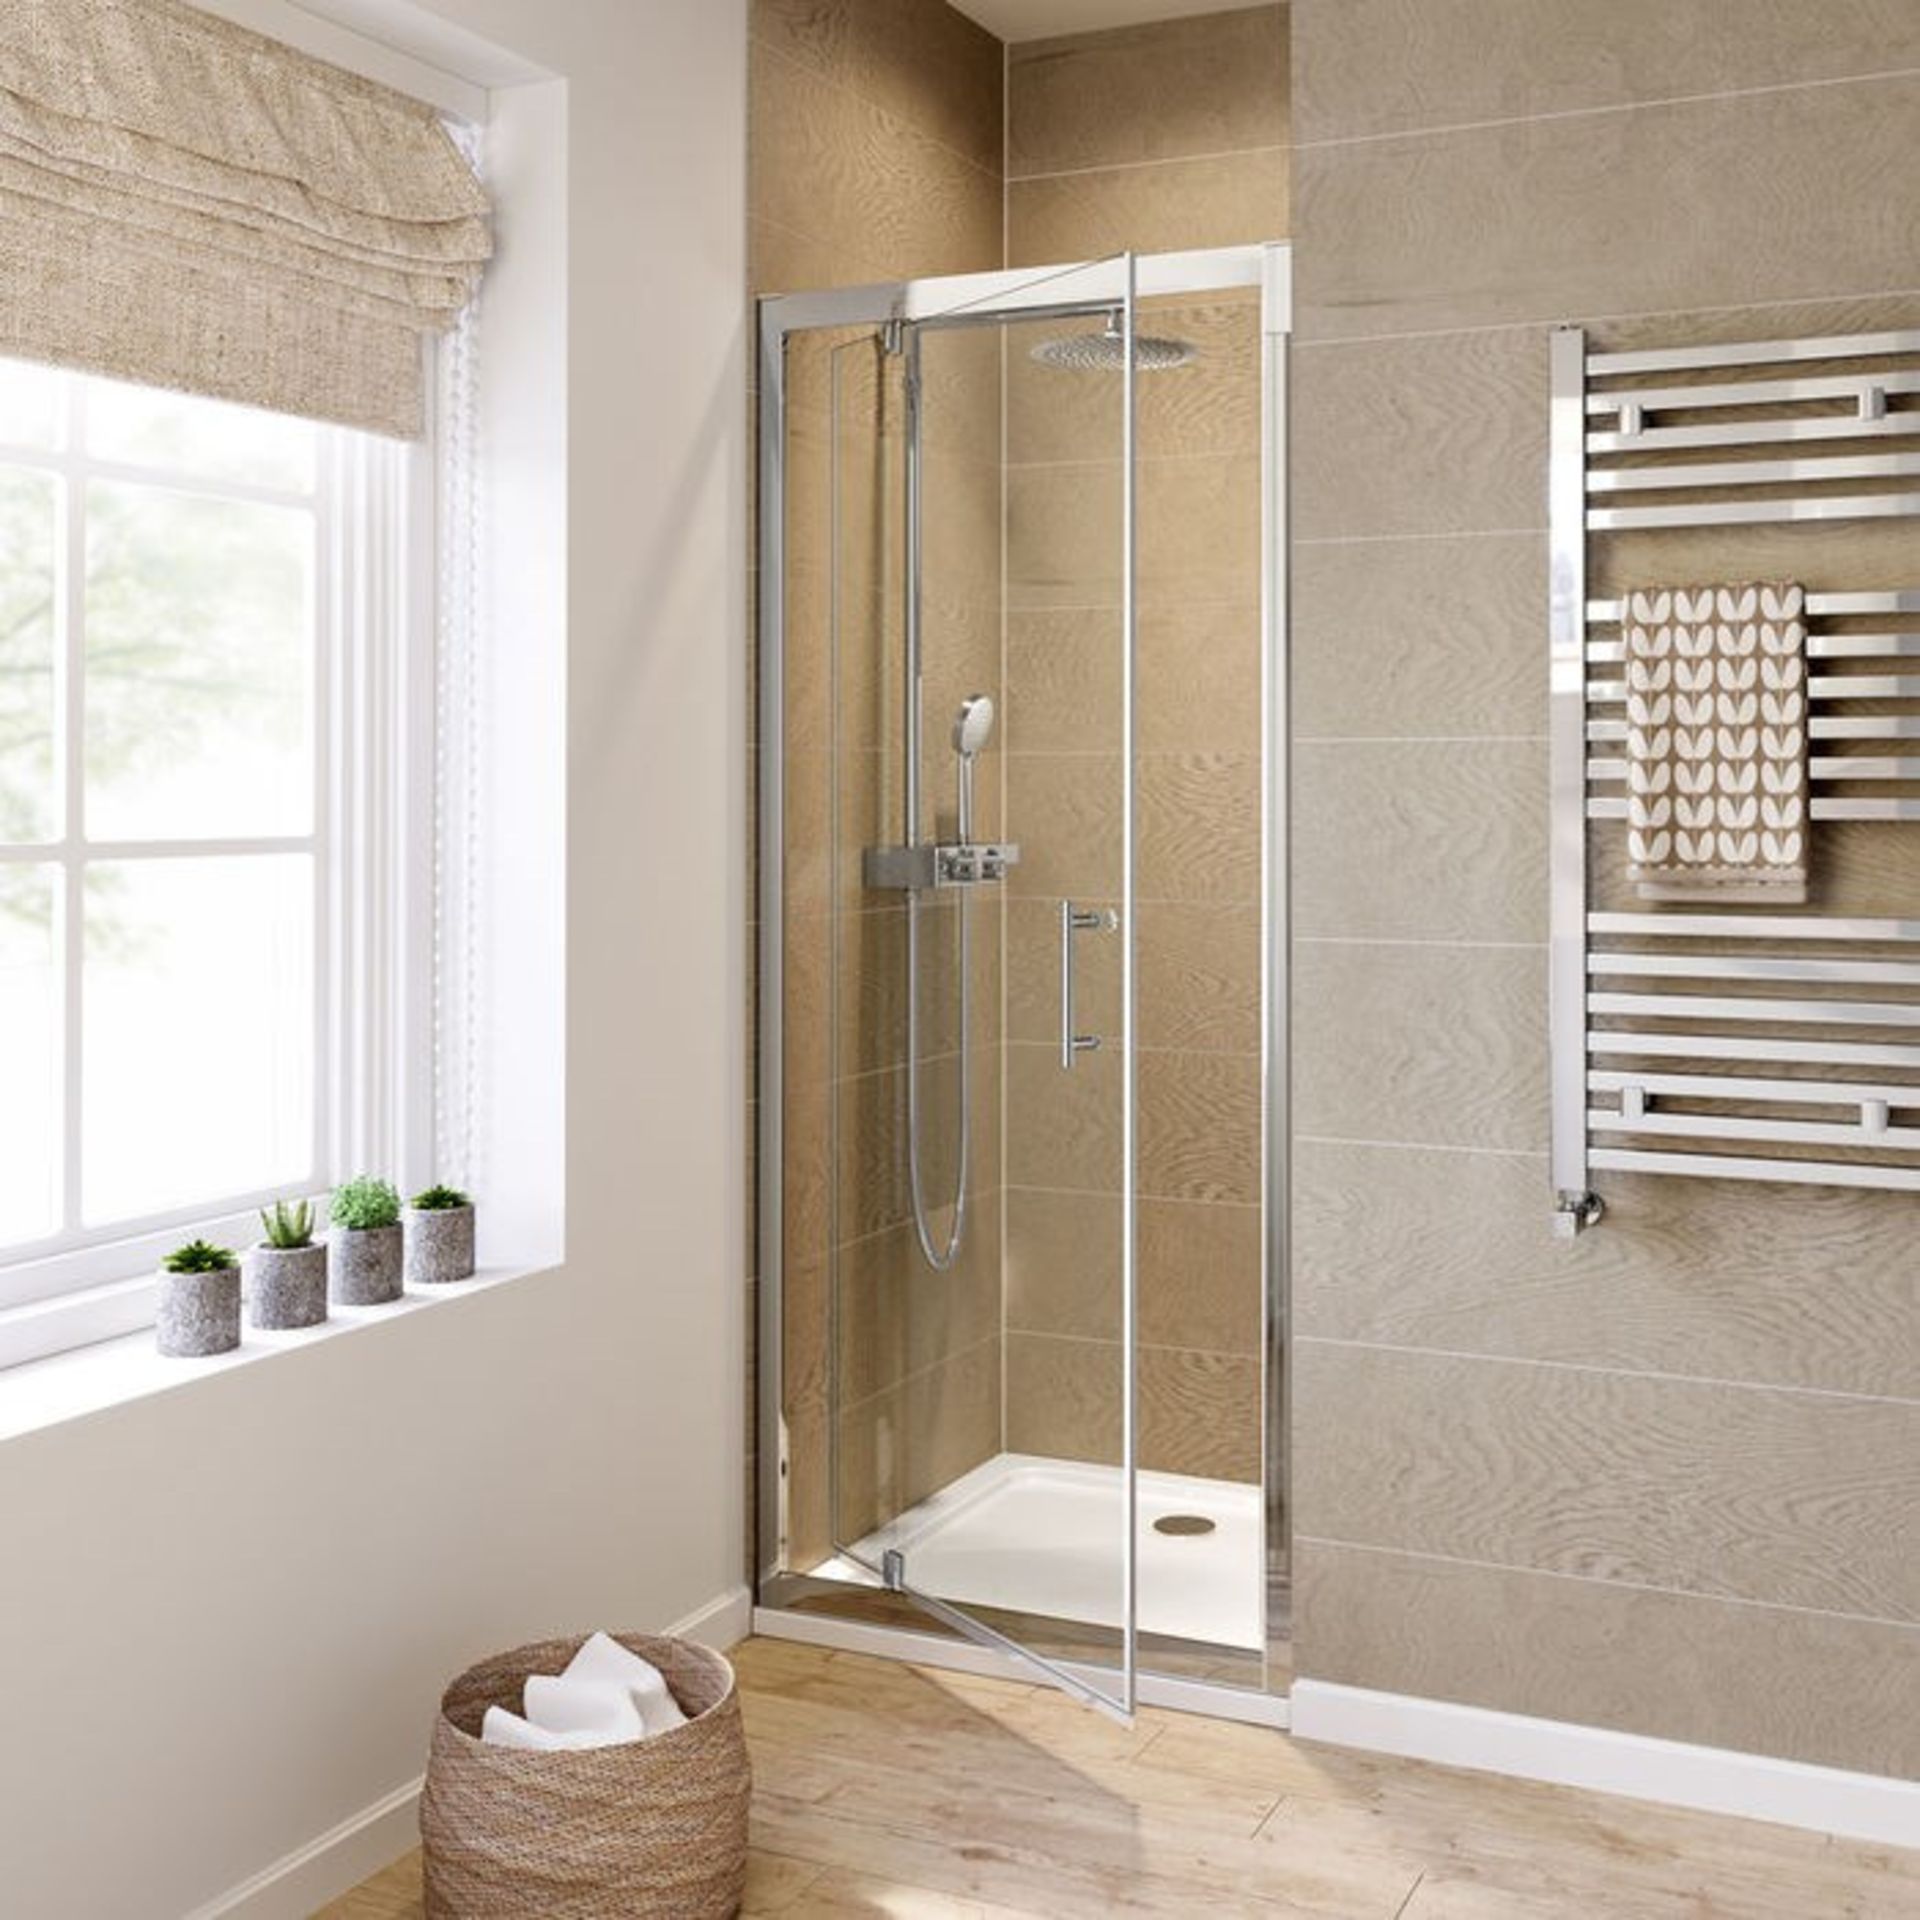 Twyfords 700mm - 6mm - Premium Pivot Shower Door. RRP £299.99.8mm Safety Glass Fully waterproo... - Image 2 of 3